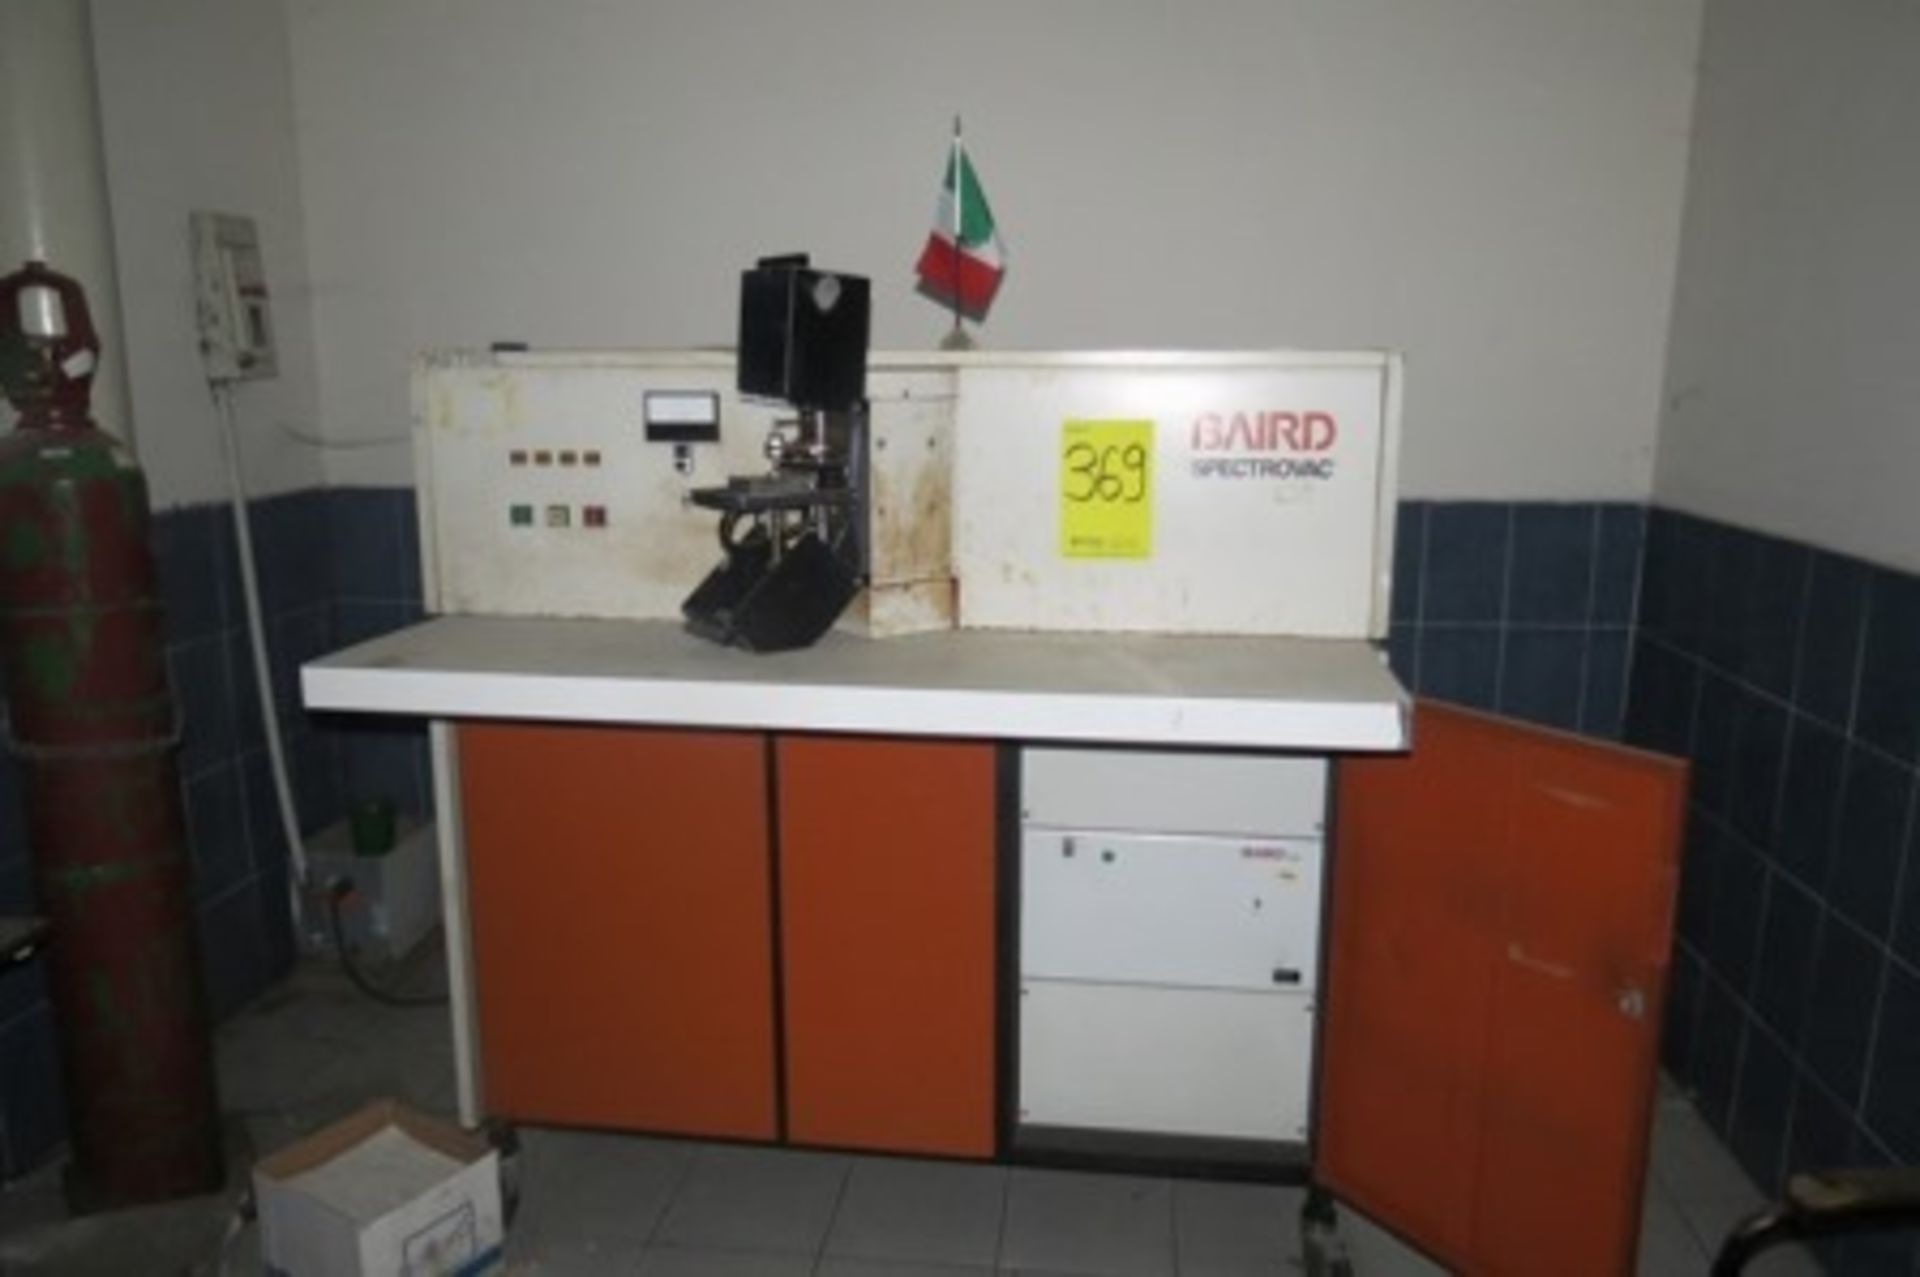 Baird spectrophotometer, laboratory furniture, test tube cabinet, bookcase and desk.